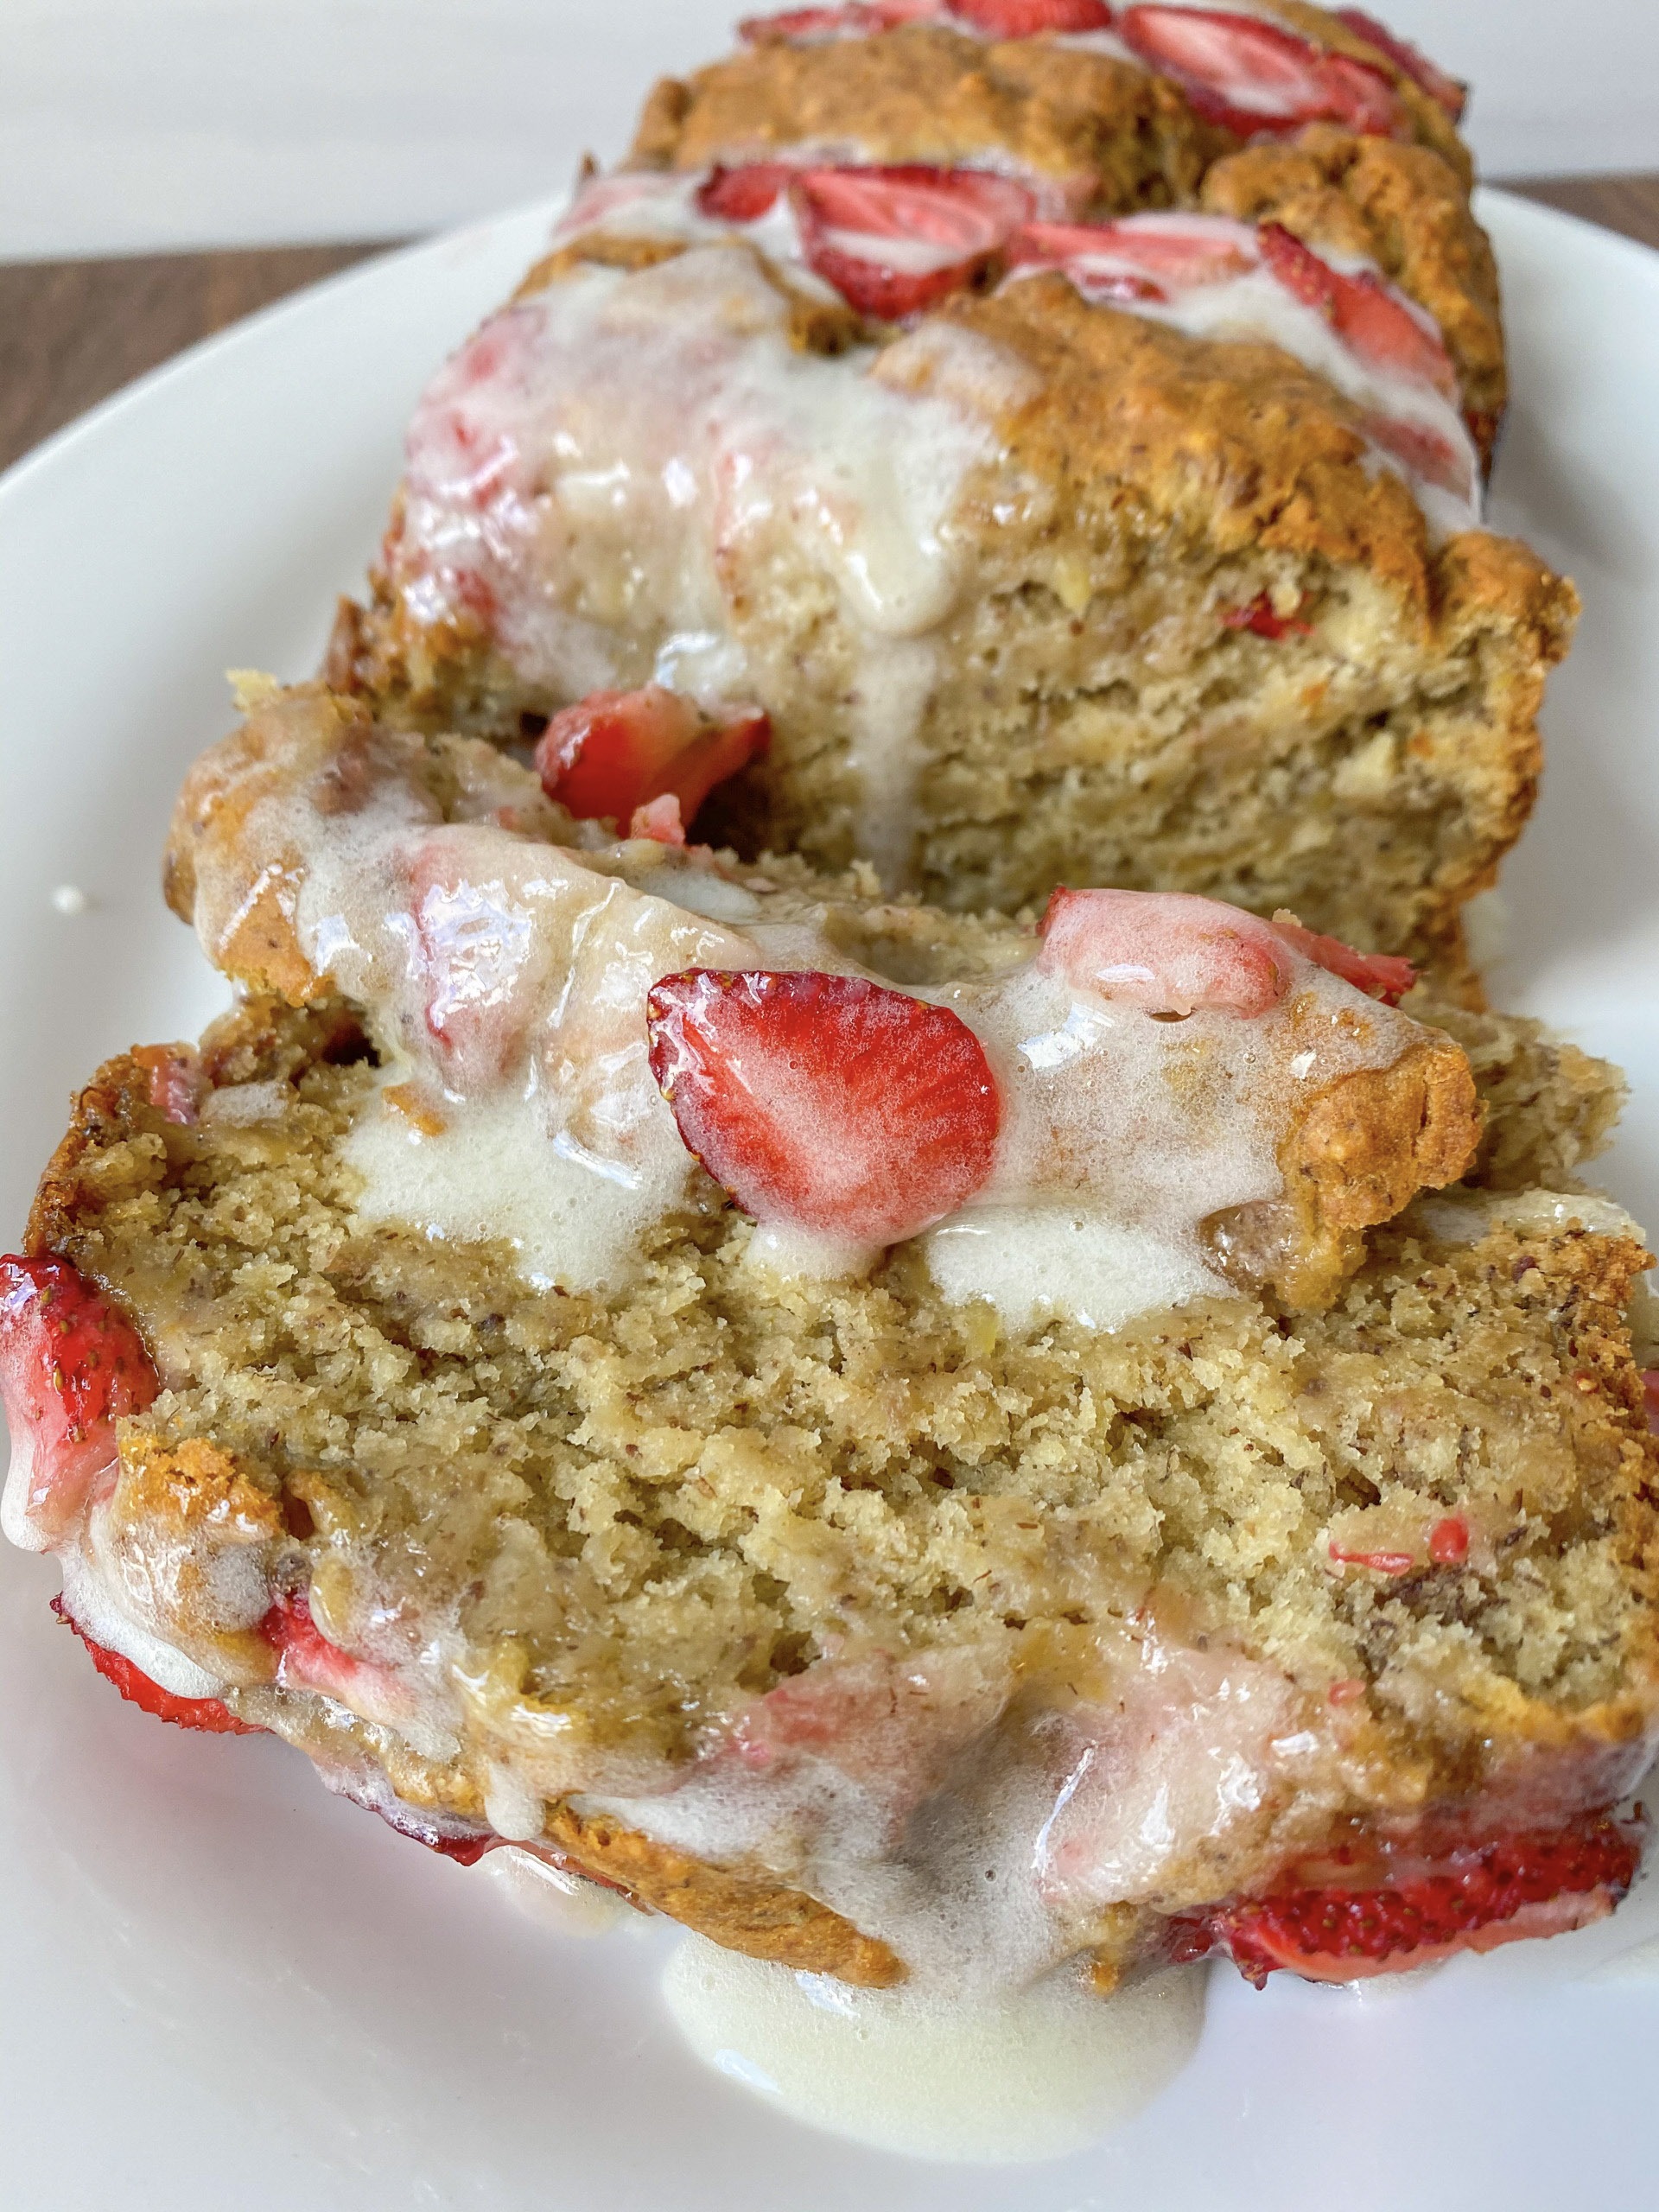 This Moist Vegan Strawberry Banana Bread is going to impress everyone in your home! Enjoy this tender, soft, and better-for-you bread for breakfast, a snack, or even dessert. You need a handful of ingredients that you probably already have in your kitchen. No one will guess this vegan strawberry banana bread is vegan and gluten-free friendly and everyone will love it!